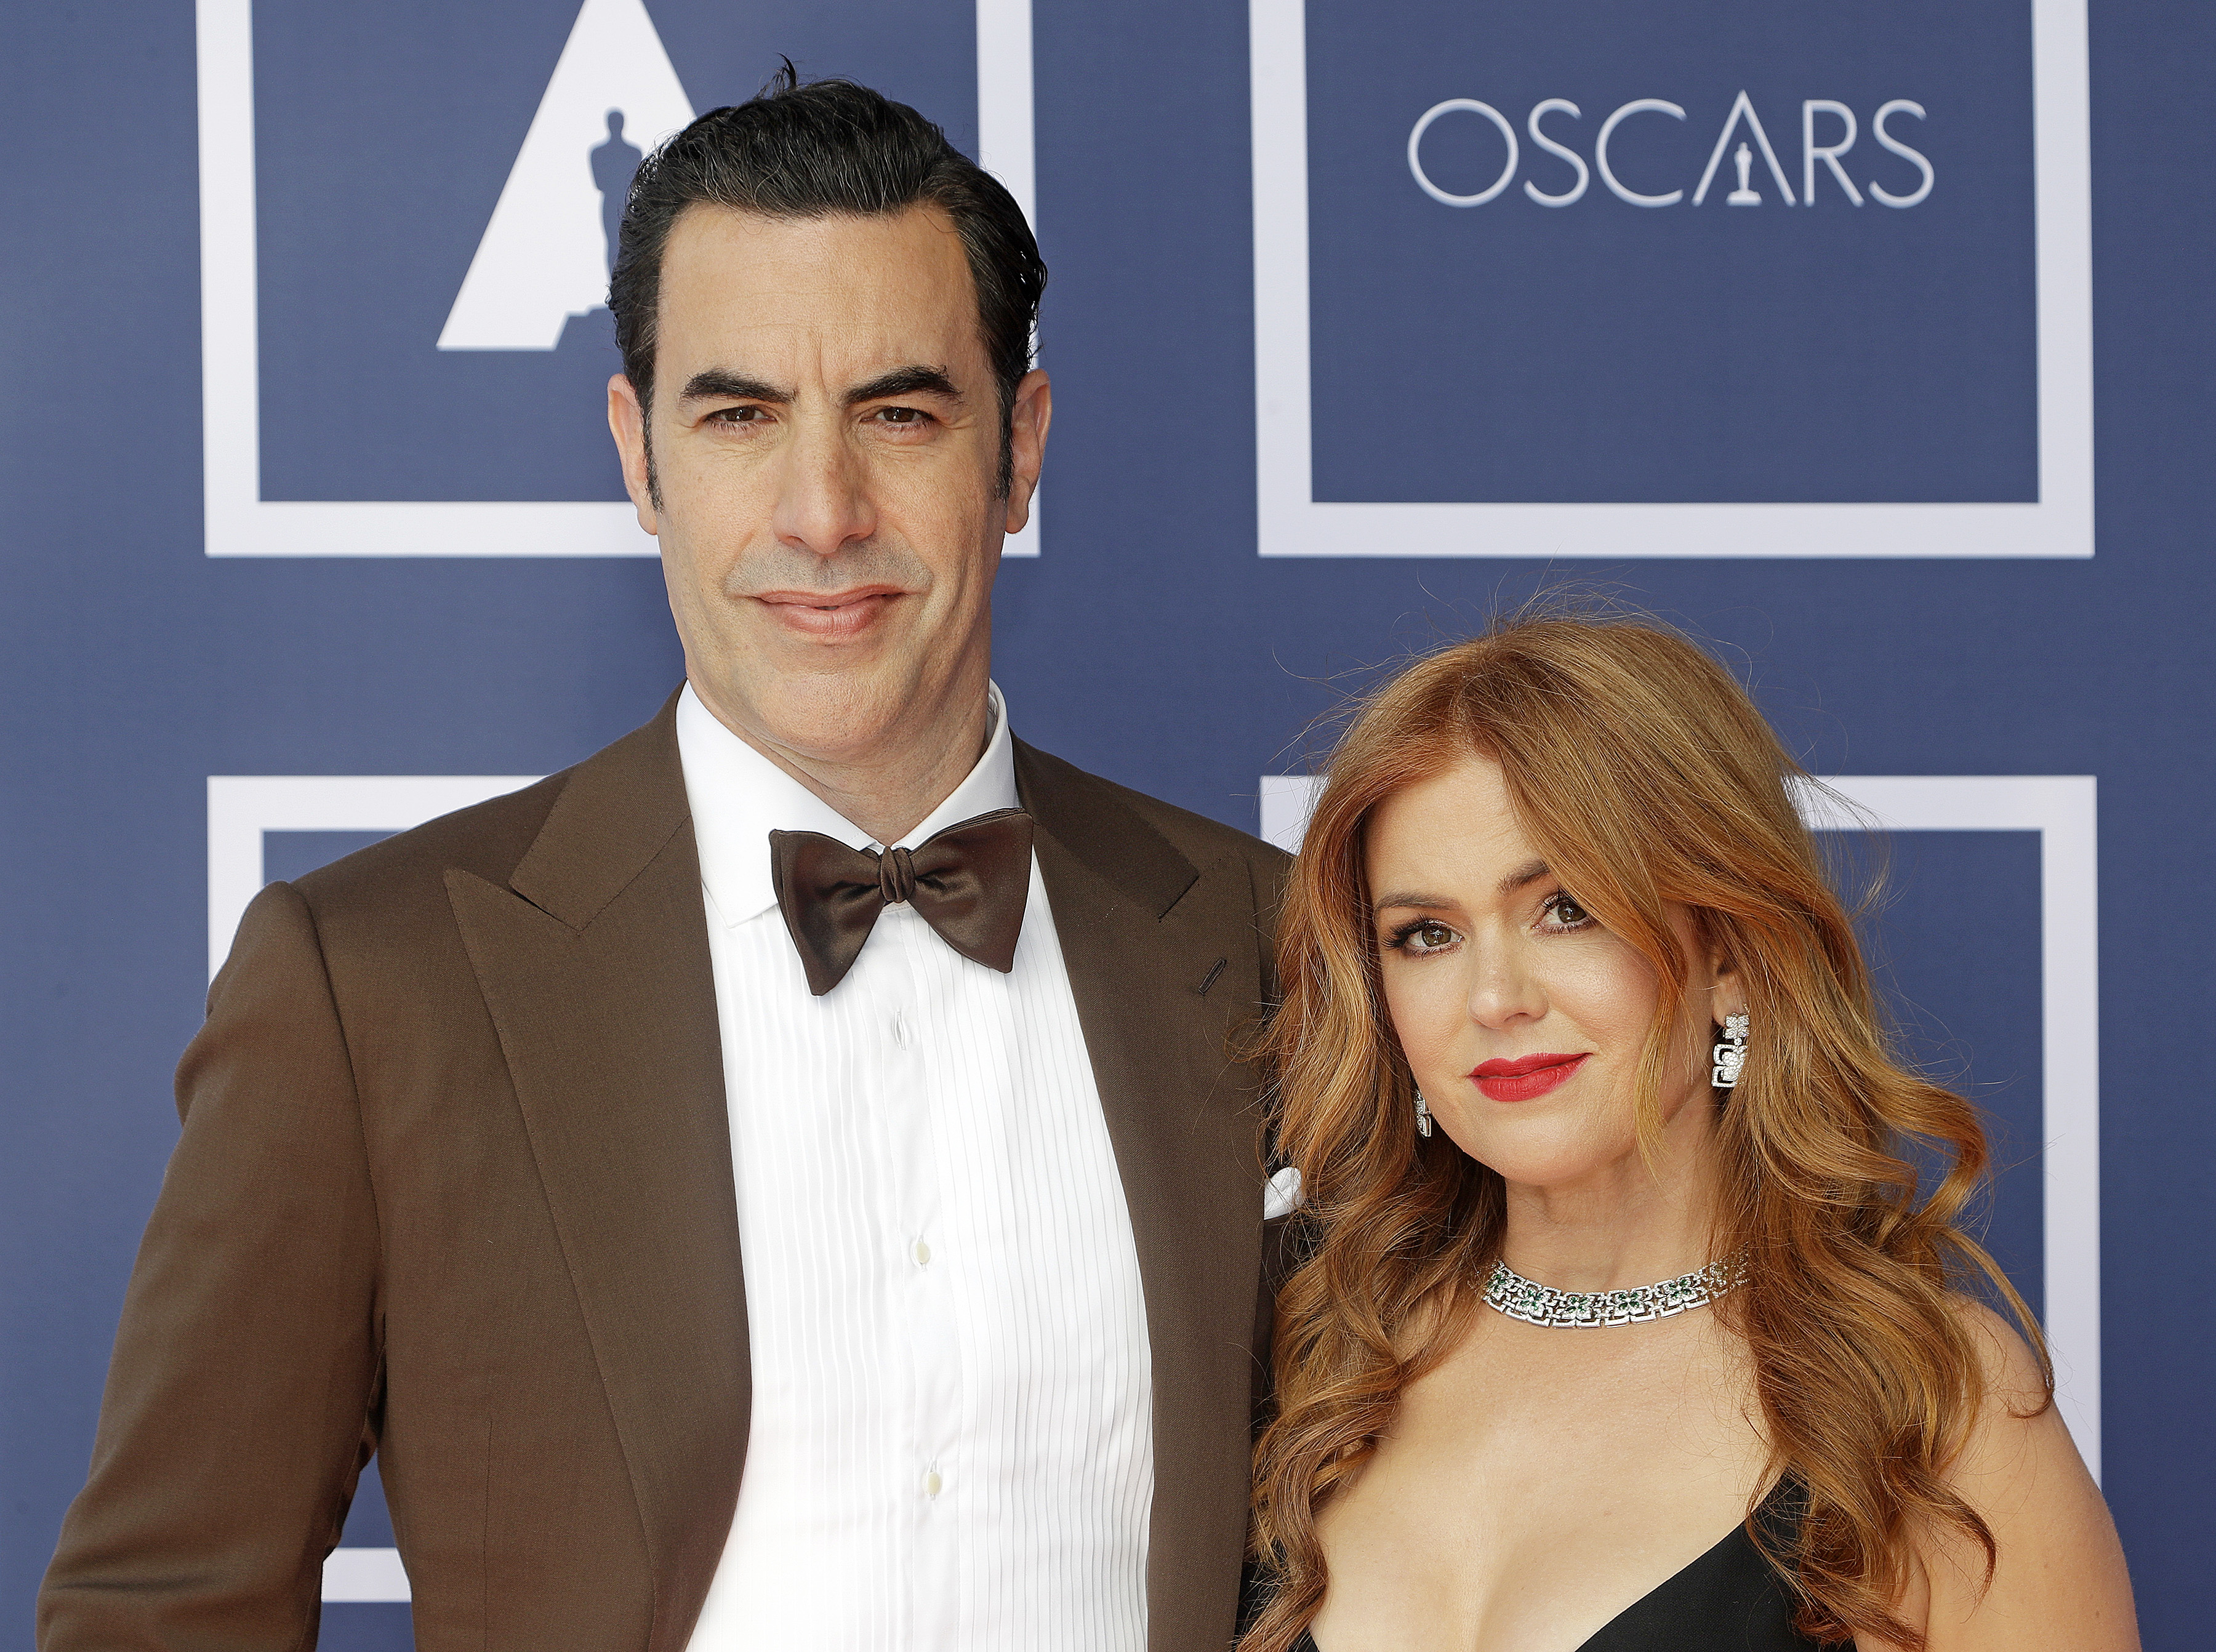 Fisher announced her separation from actor Sacha Baron Cohen, 52, last month